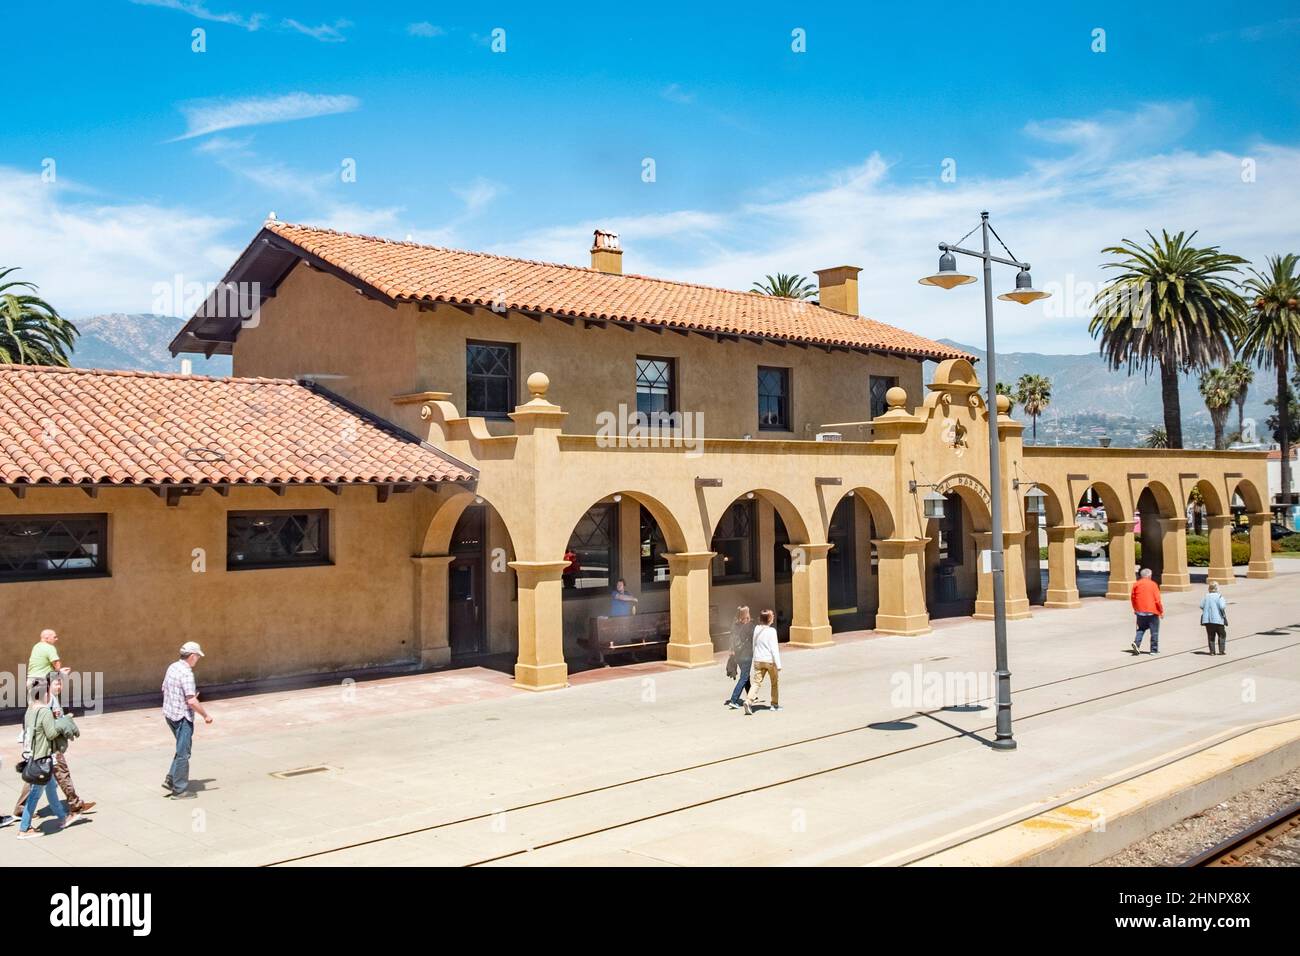 people wait for the pacific surfliner train at old mexican style Santa Barbara station Stock Photo